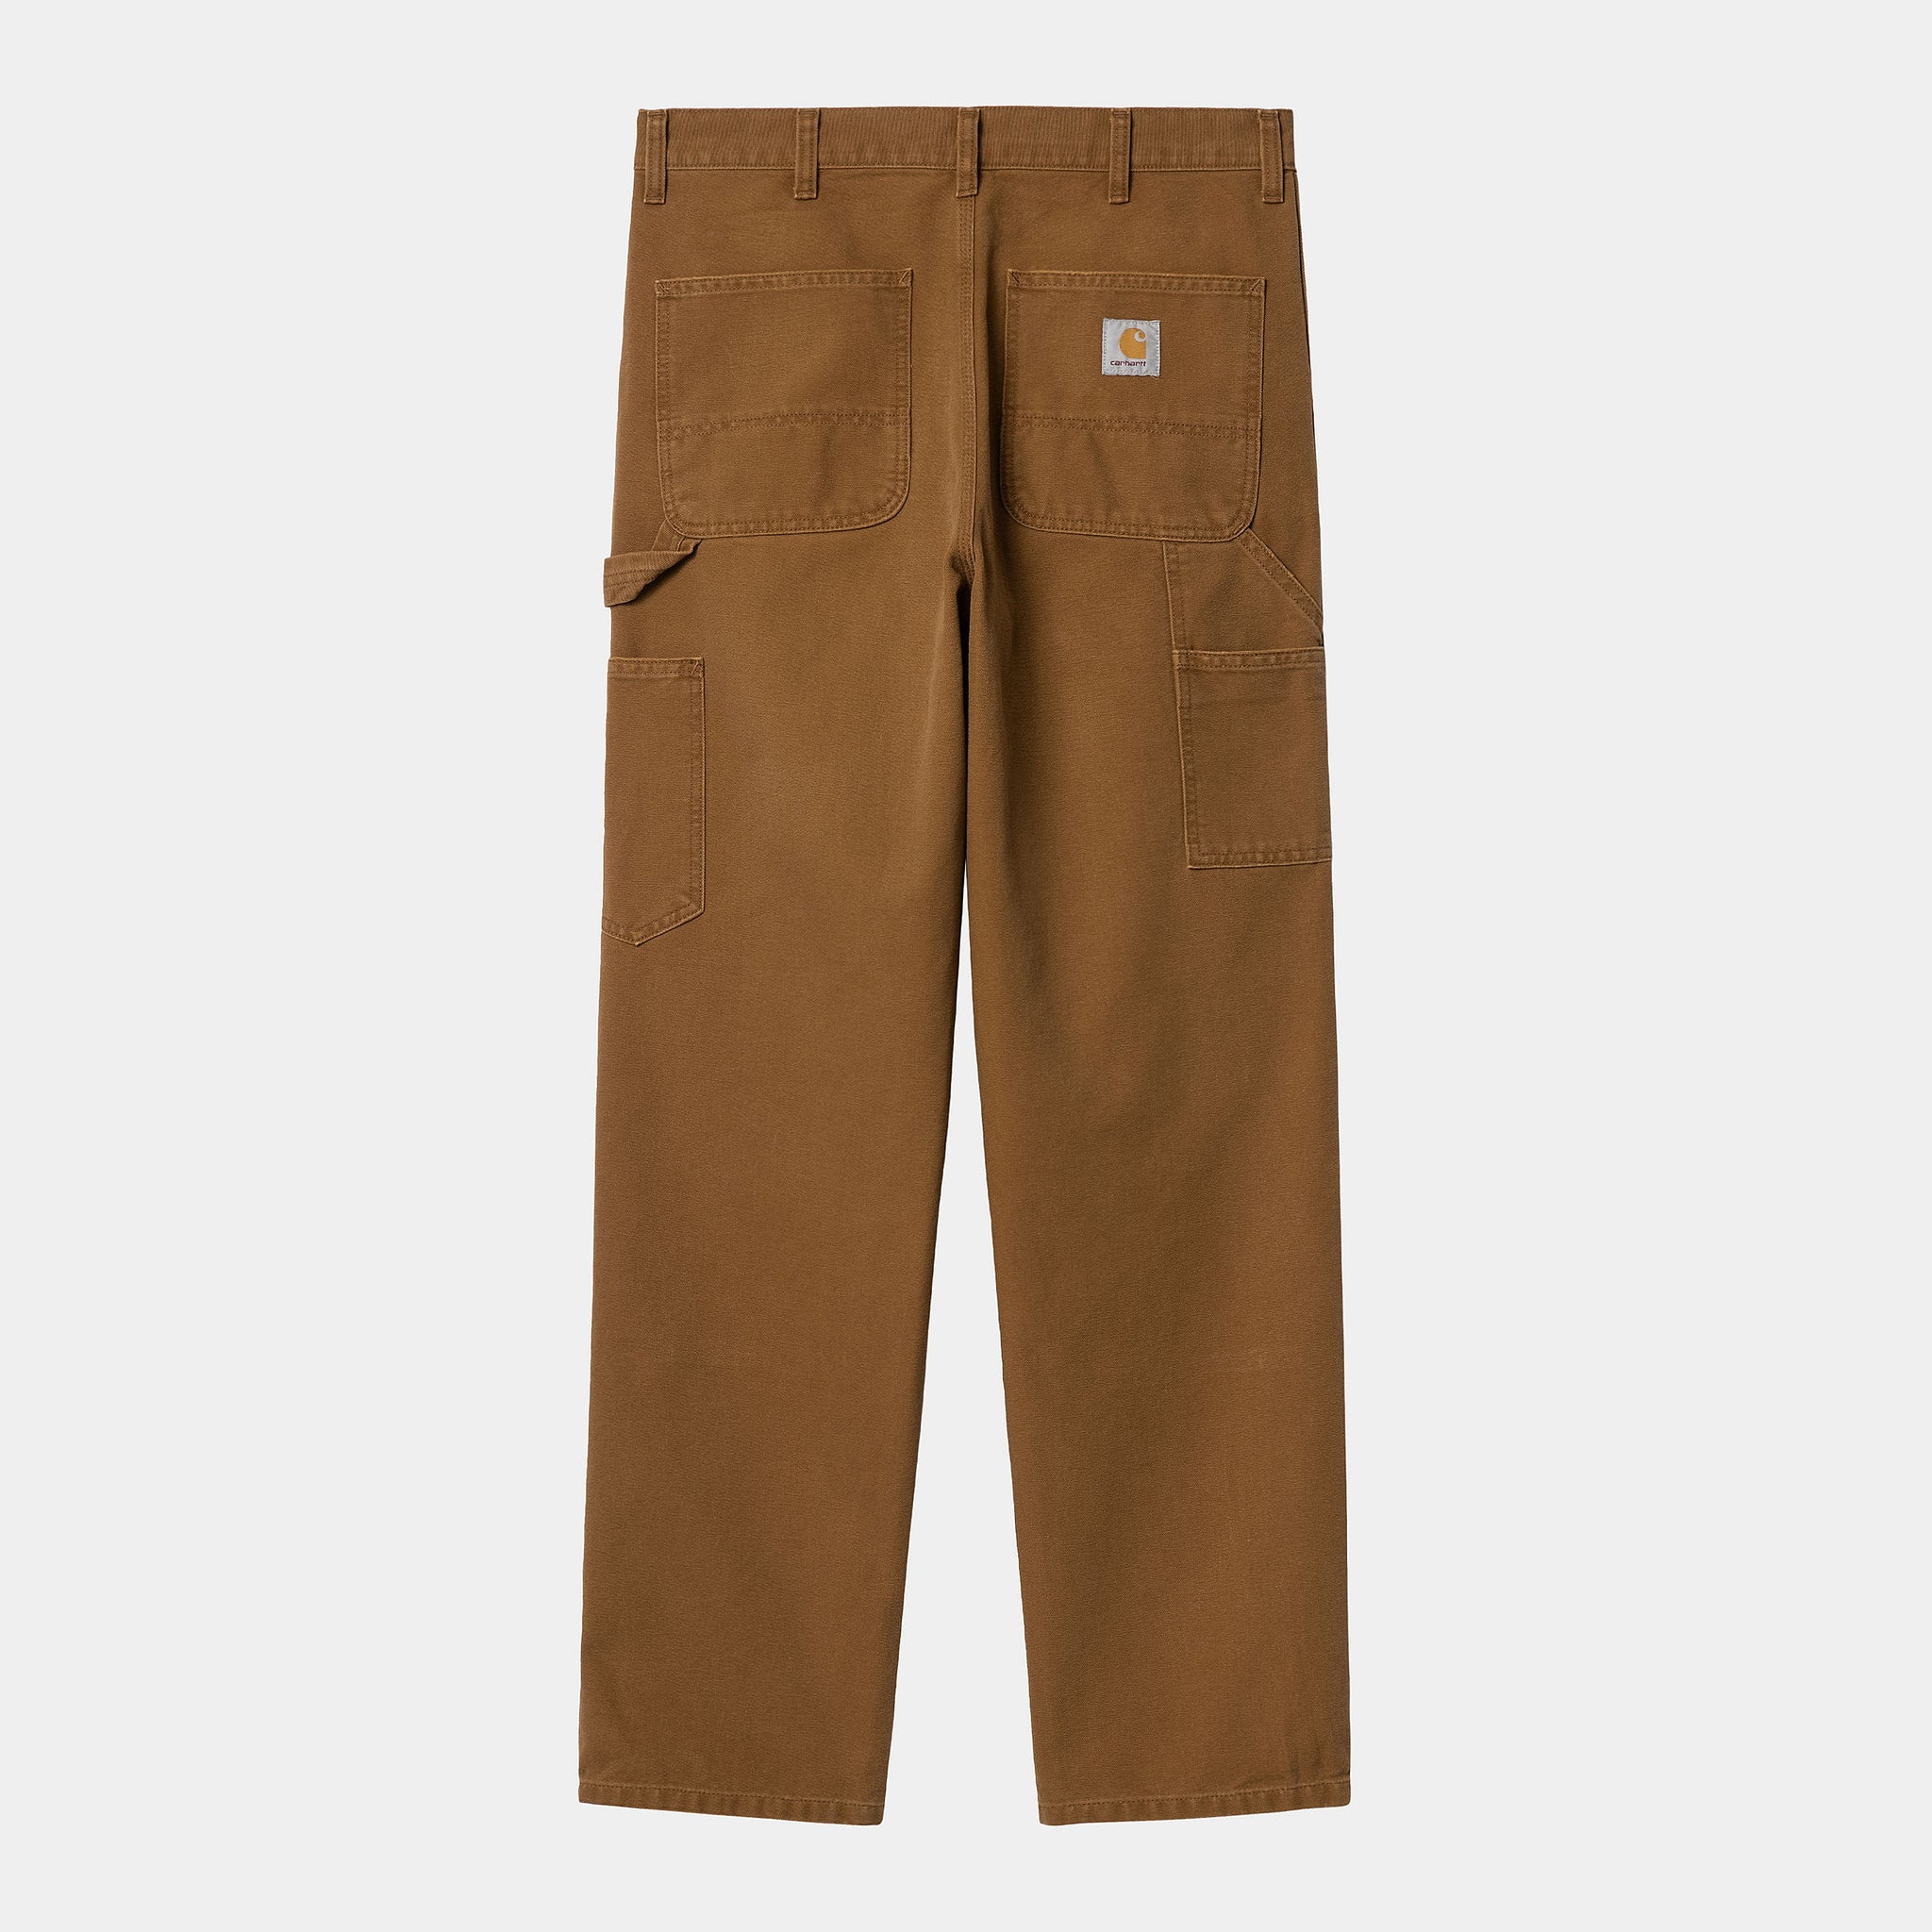 Carhartt WIP Double Knee Pant (Deep H Brown aged canvas)